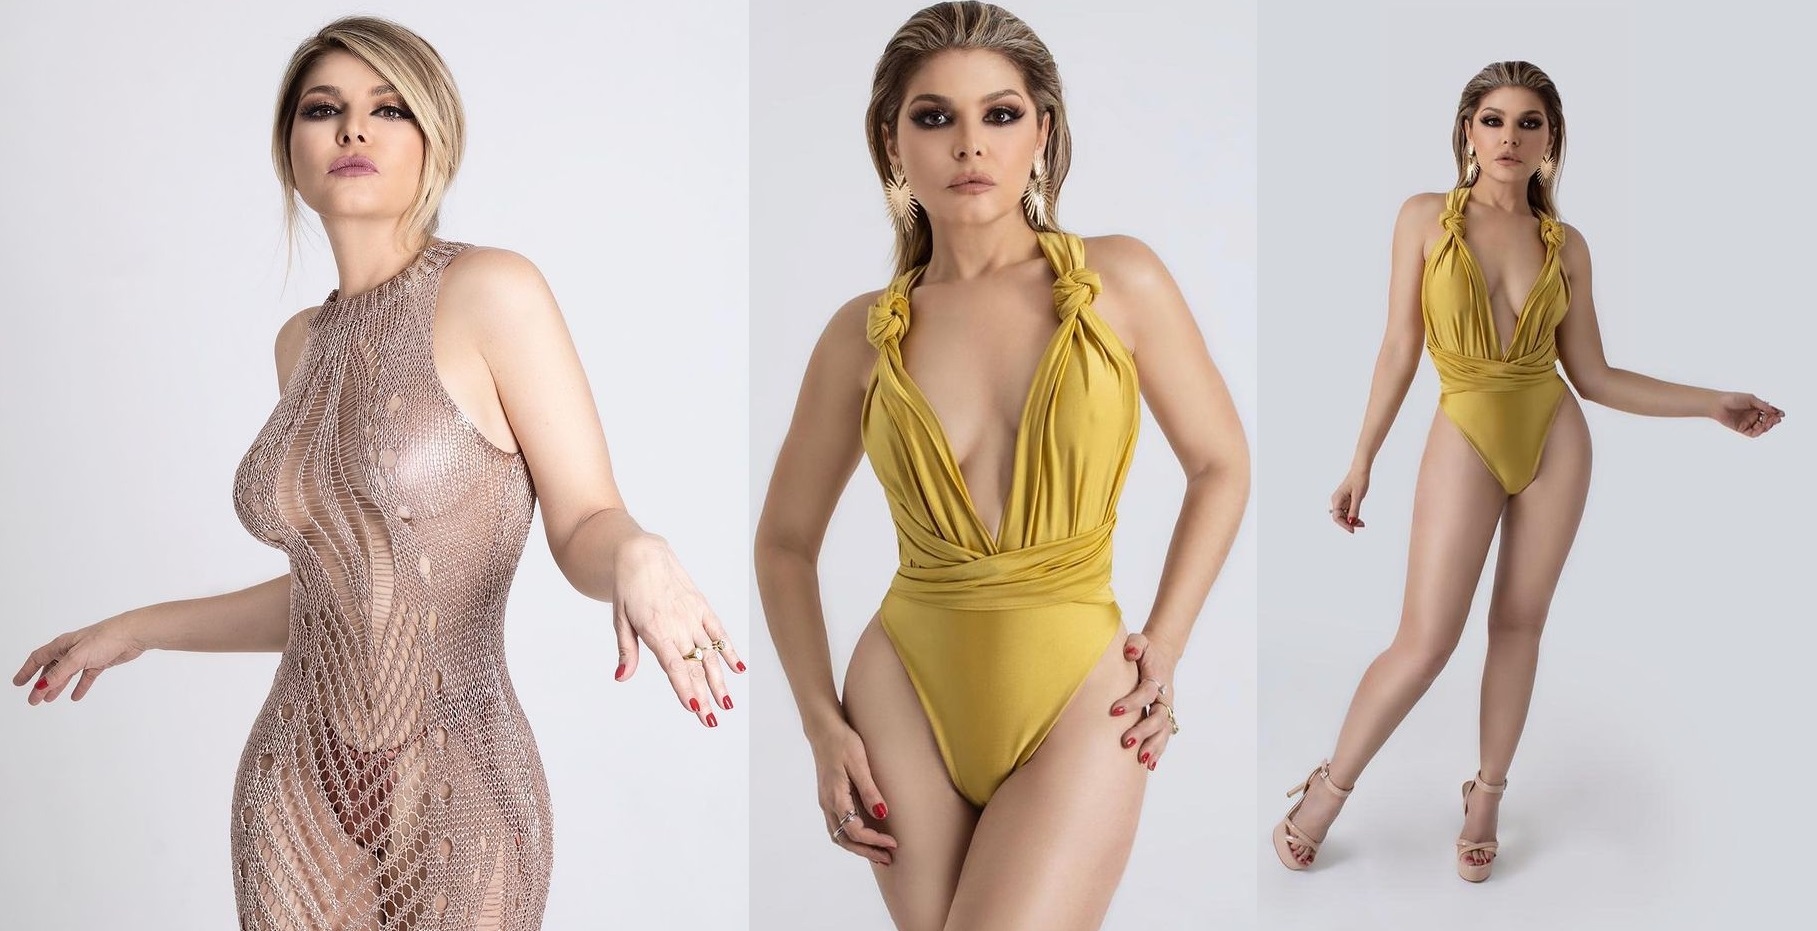 Itati Cantoral shows off her curves to the fullest wearing a yellow swimsuit with a deep neckline